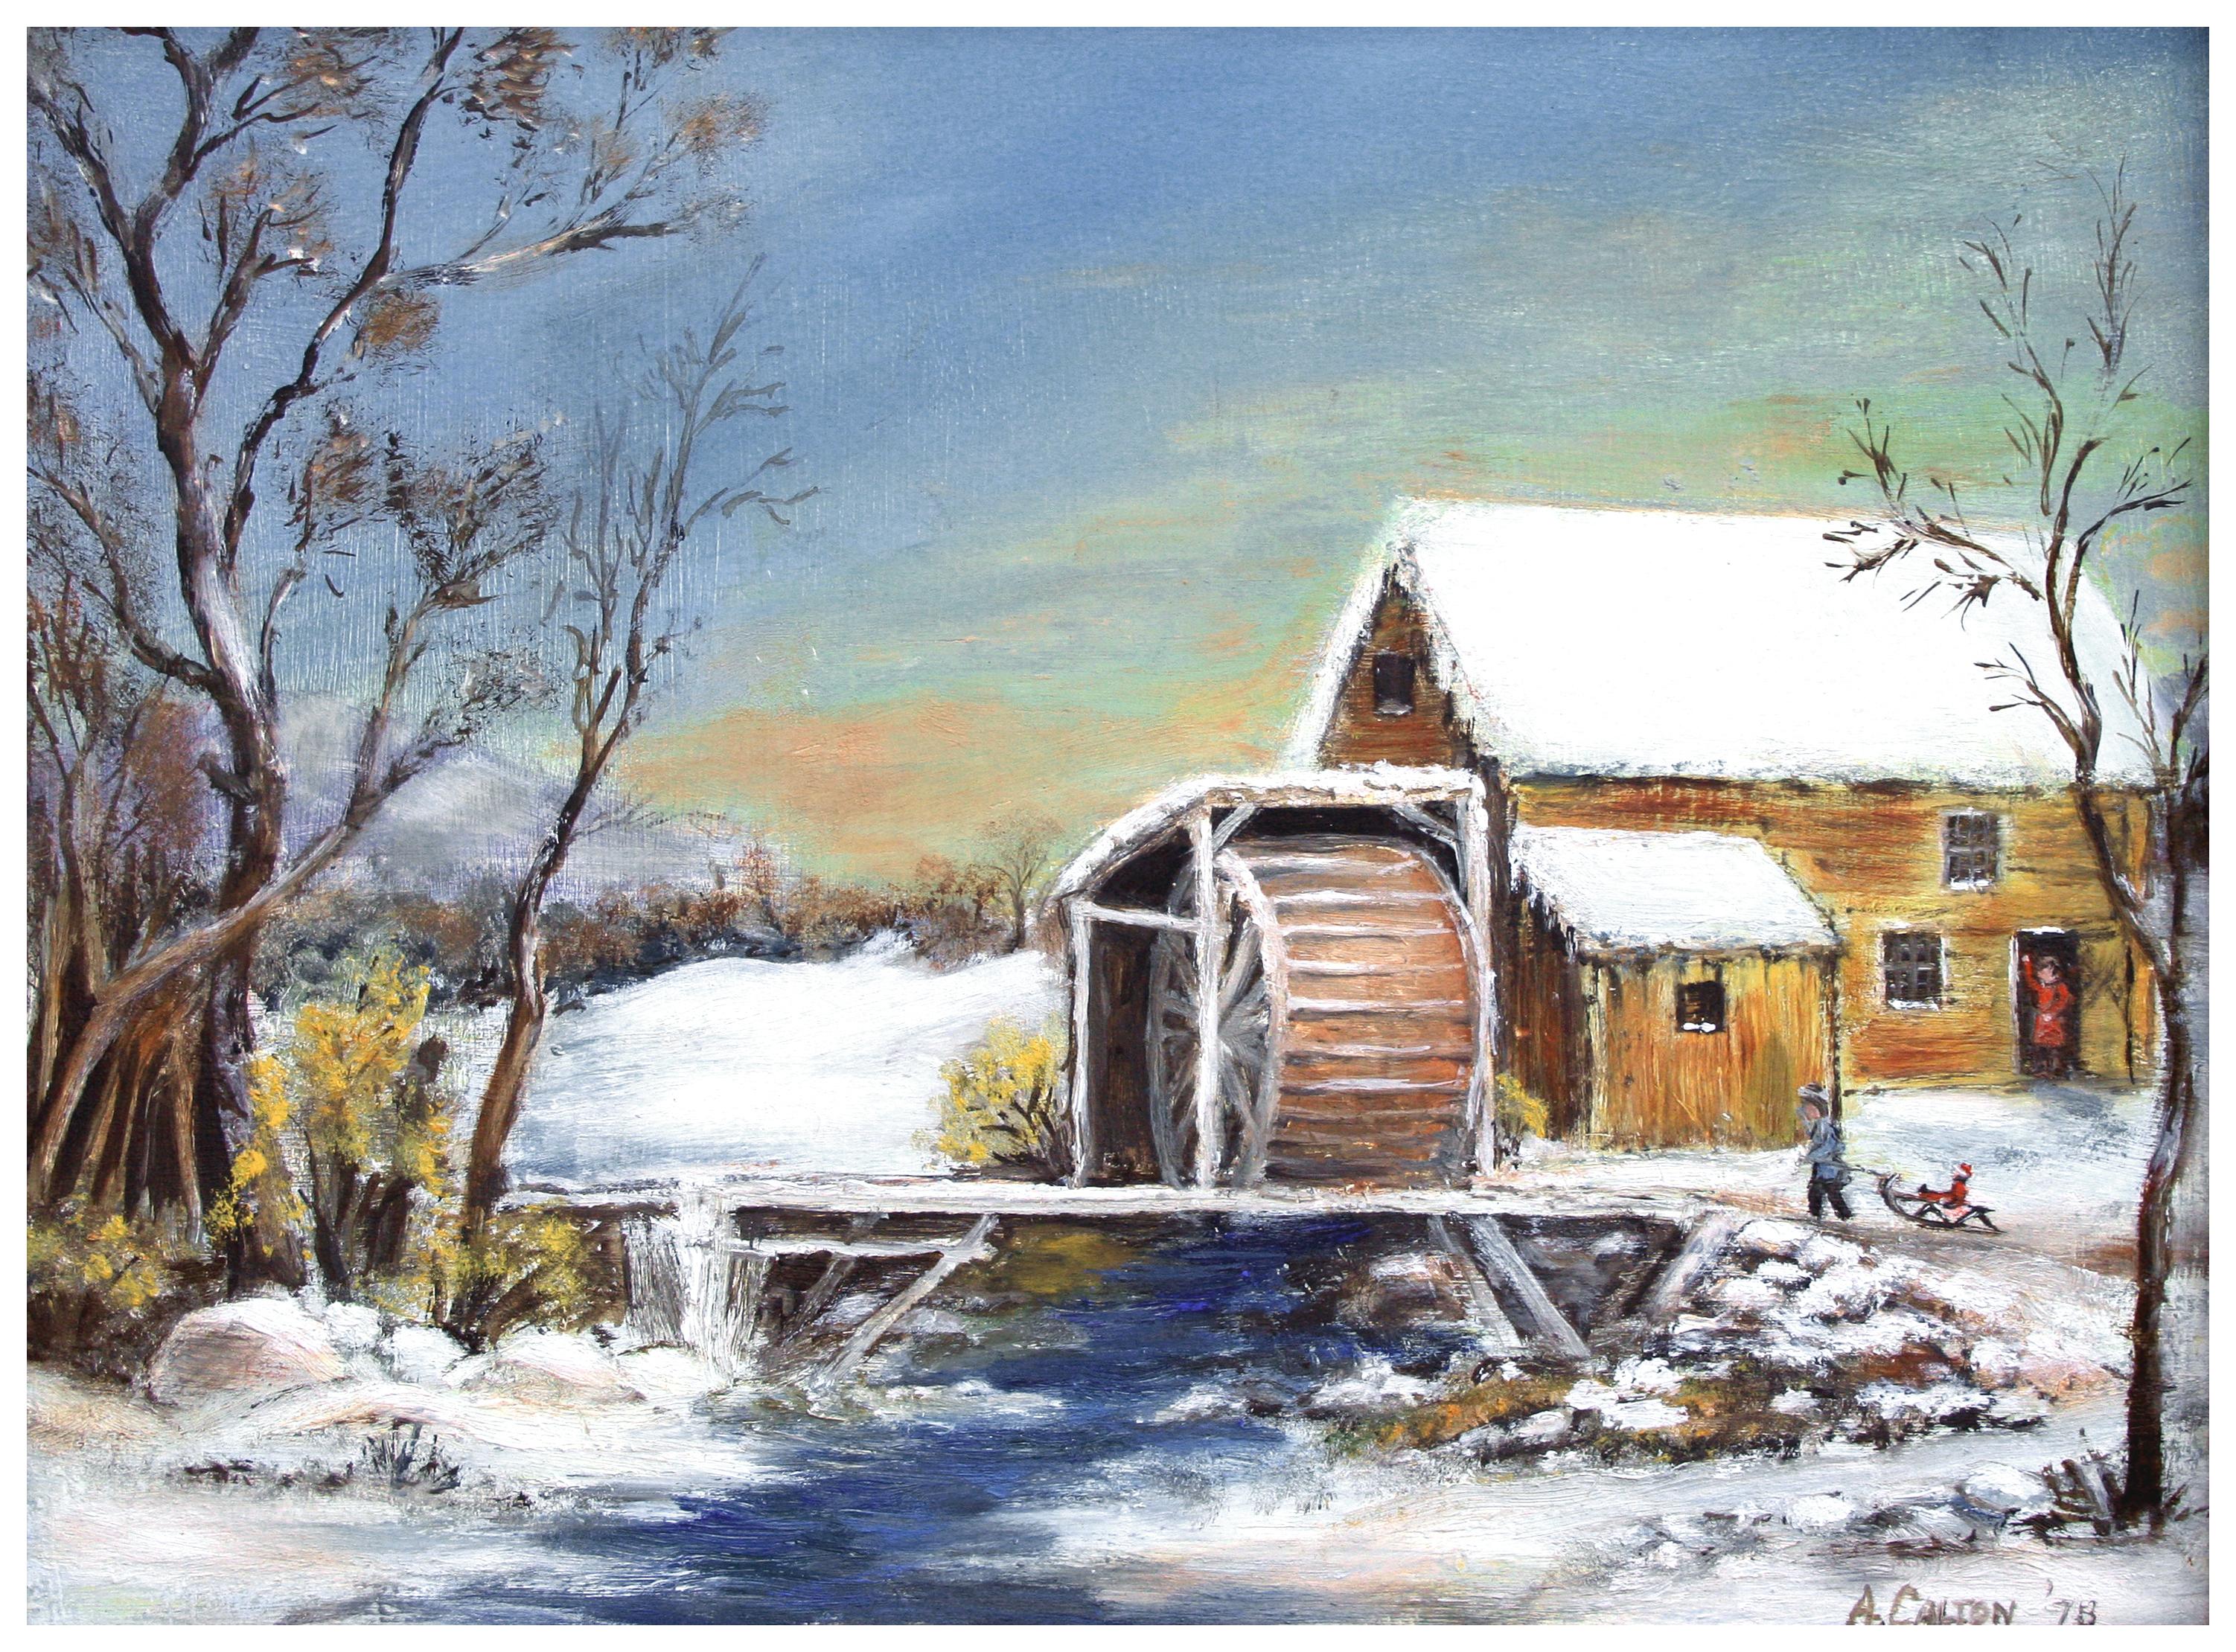 Snowy Watermill - Winter Landscape - Painting by S. Carlton